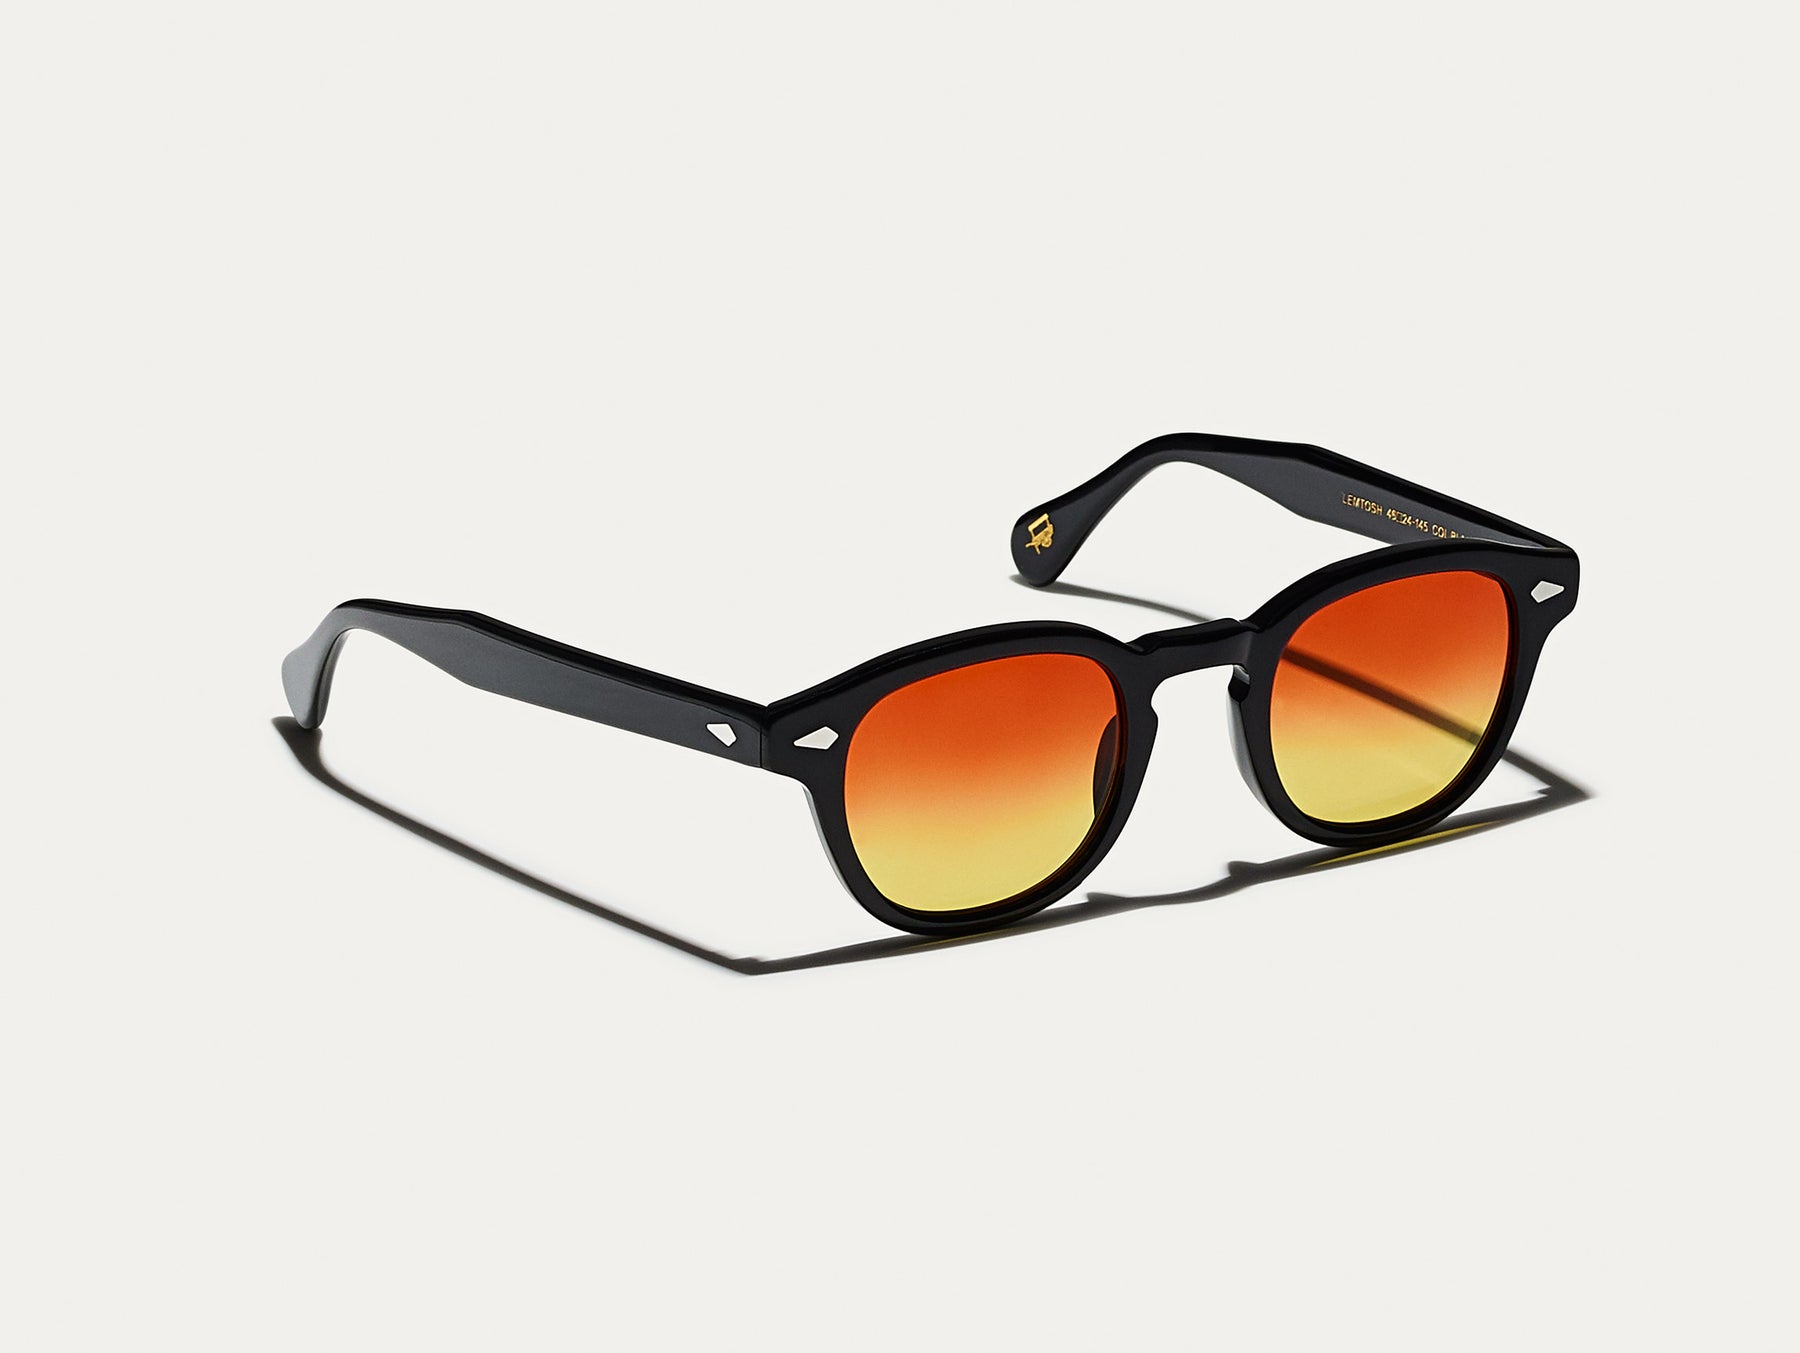 The LEMTOSH Black with Candy Corn Tinted Lenses